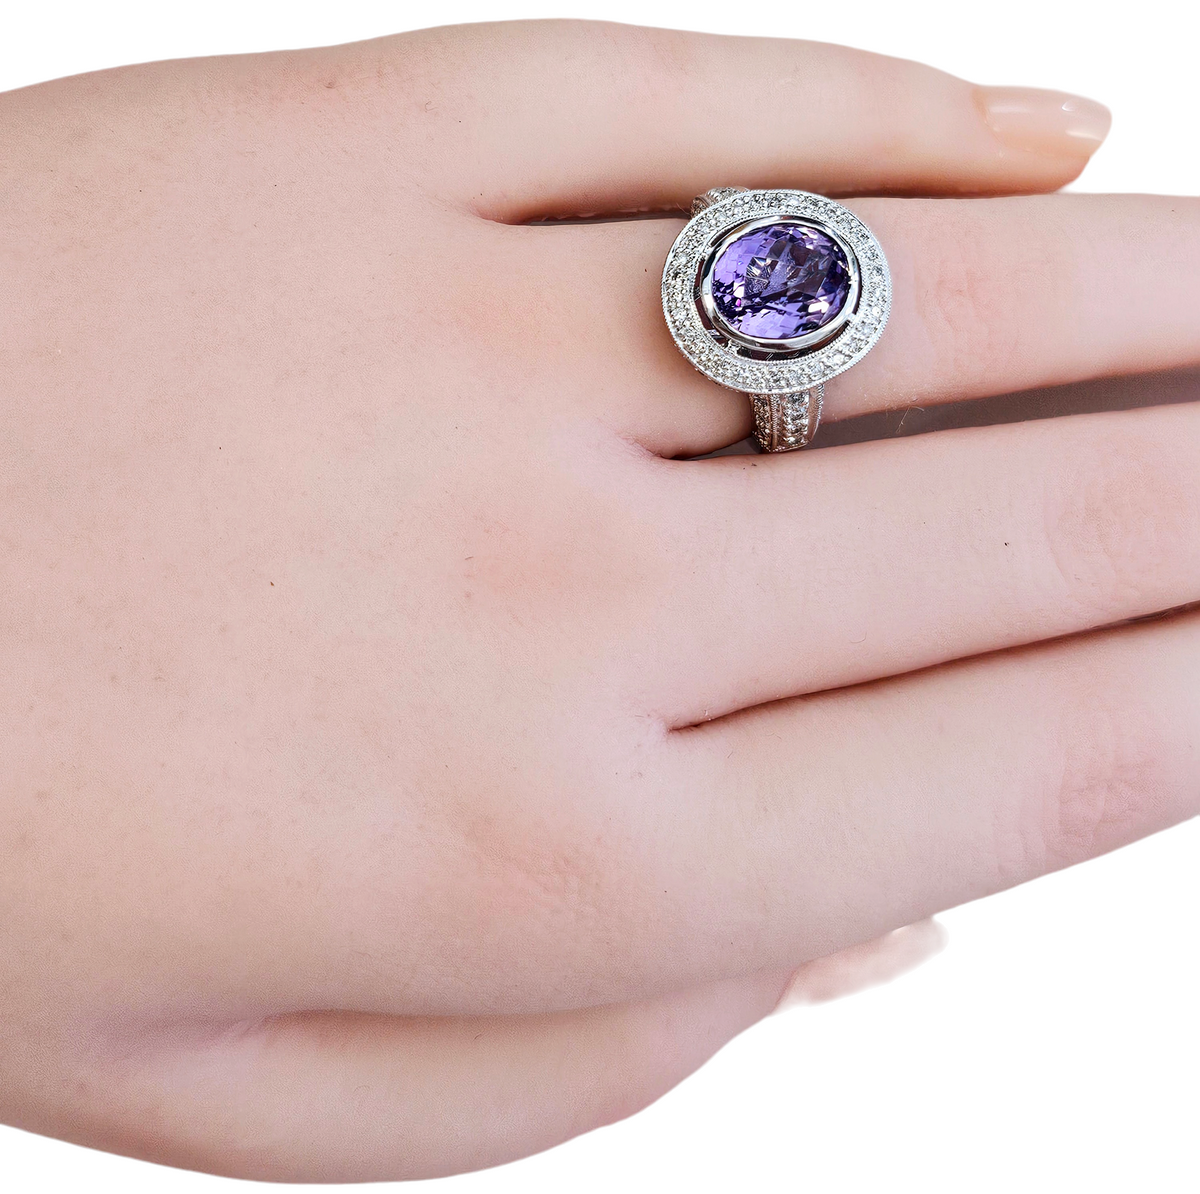 Bezel Set Oval Cut Amethyst and Diamond Halo Ring made in 18-Karat White Gold